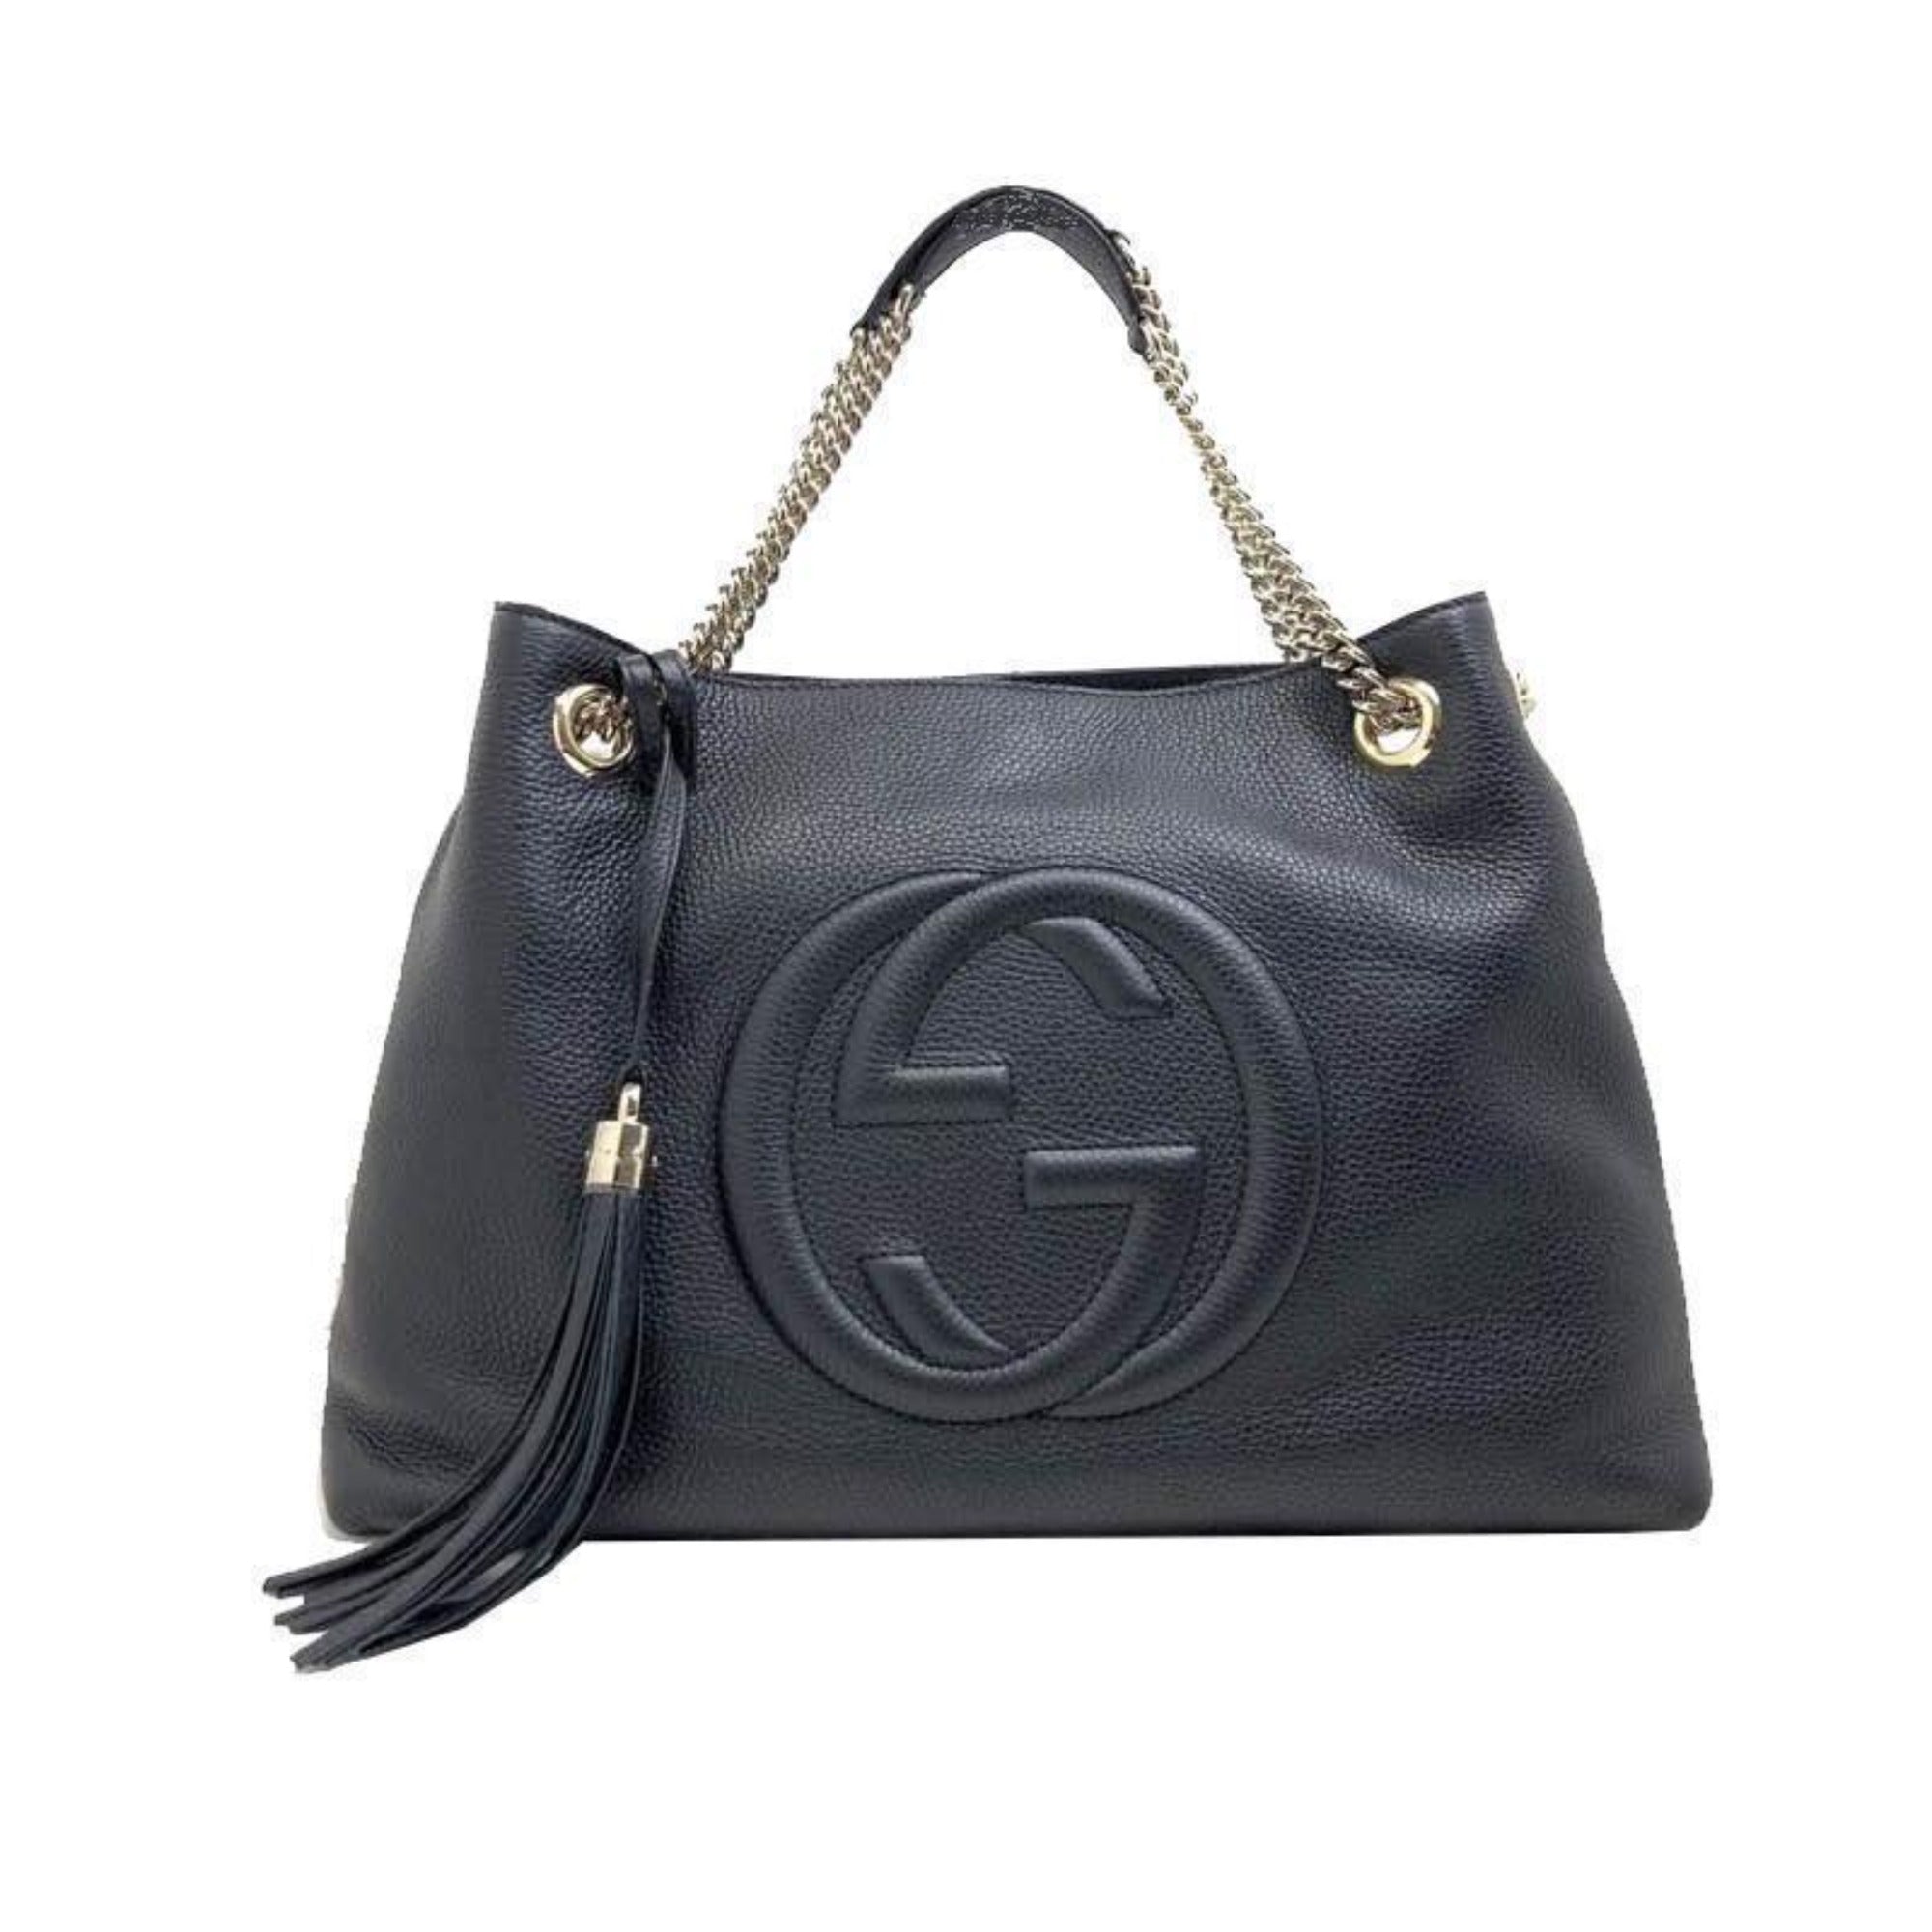 Wholesale Designer Saddle Leather Shoulder Bag With Chain Purse, Card  Holder, And Bronze Evening Bag Fashionable Luxury Handbag For Women  DICKY0750 From Dicky0750, $60.7 | DHgate.Com